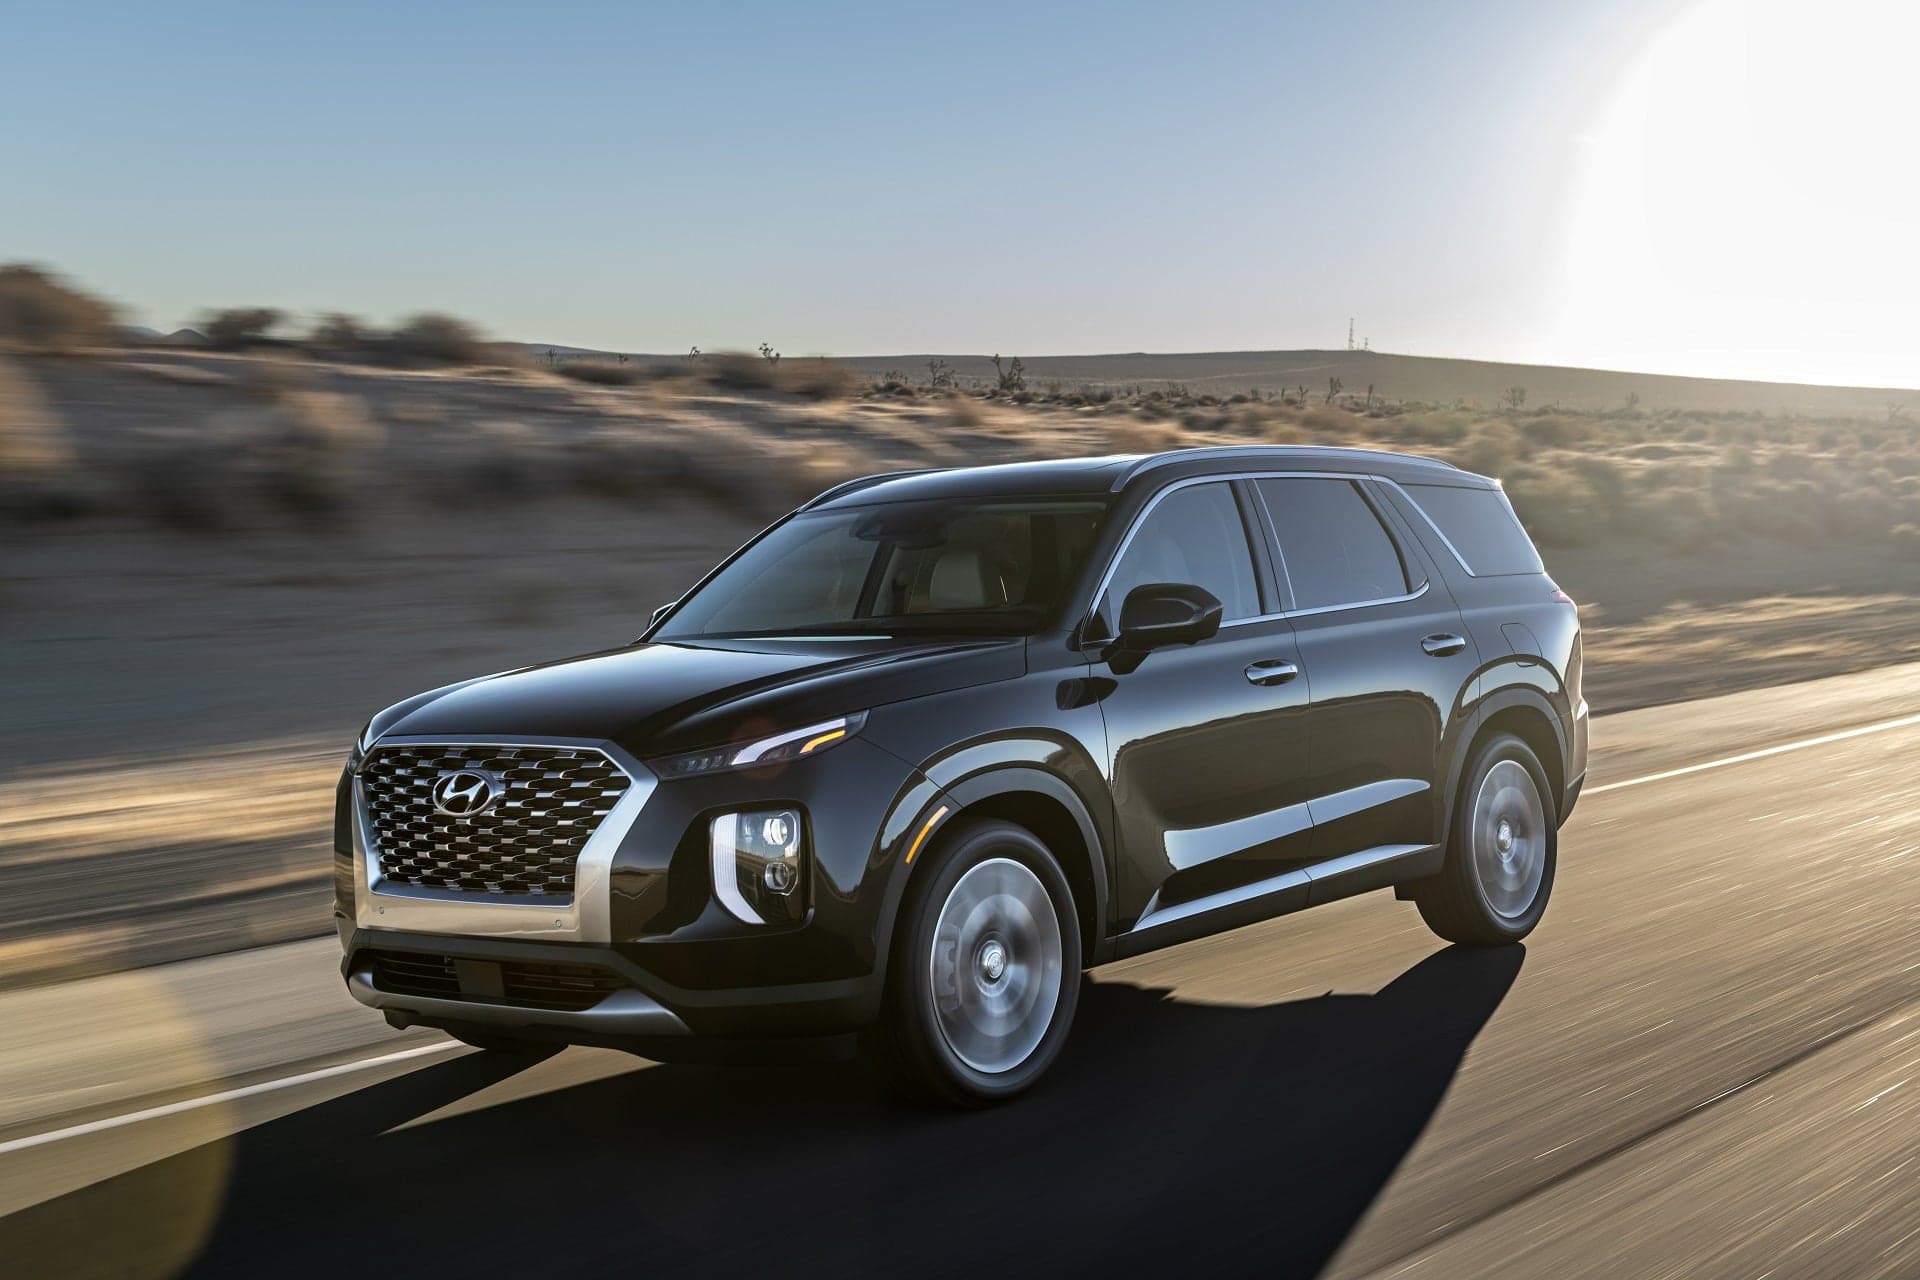 2020 Hyundai Palisade: Shooting for a US Market Homerun With Three Rows and Premium Features